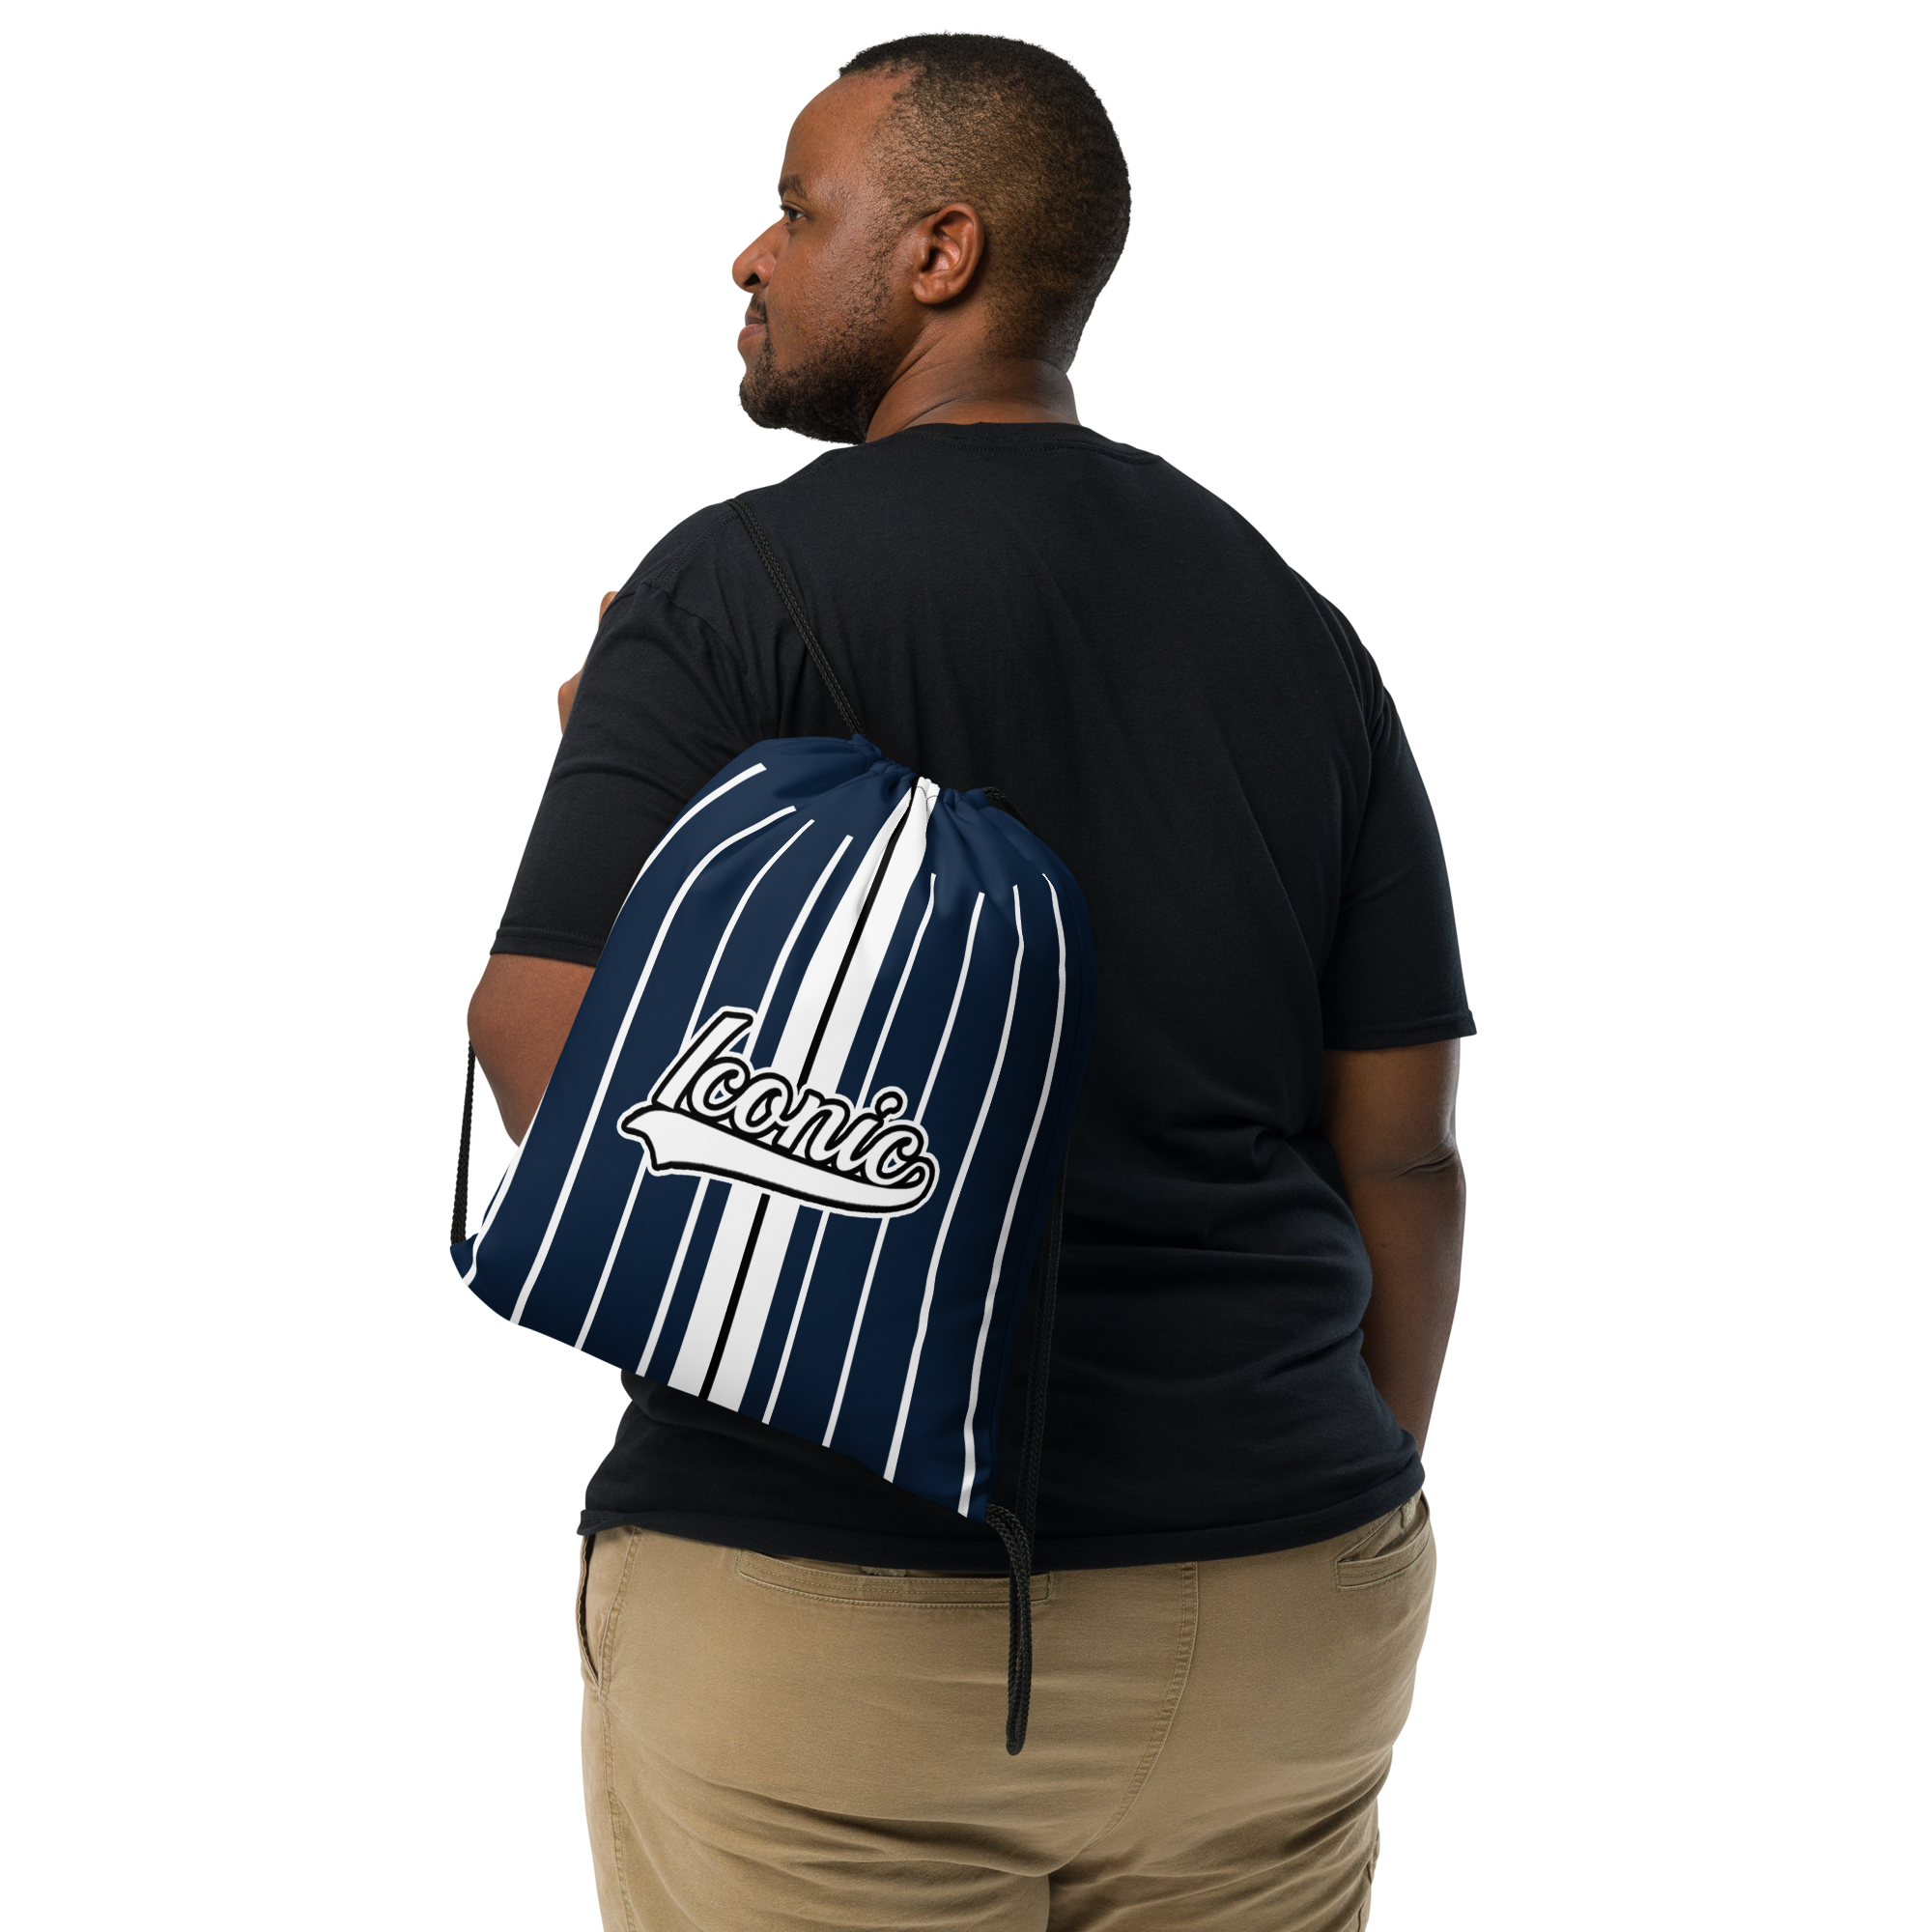 ROYAL Team Iconic. Toy Bag Pinstripe Navy and Wh